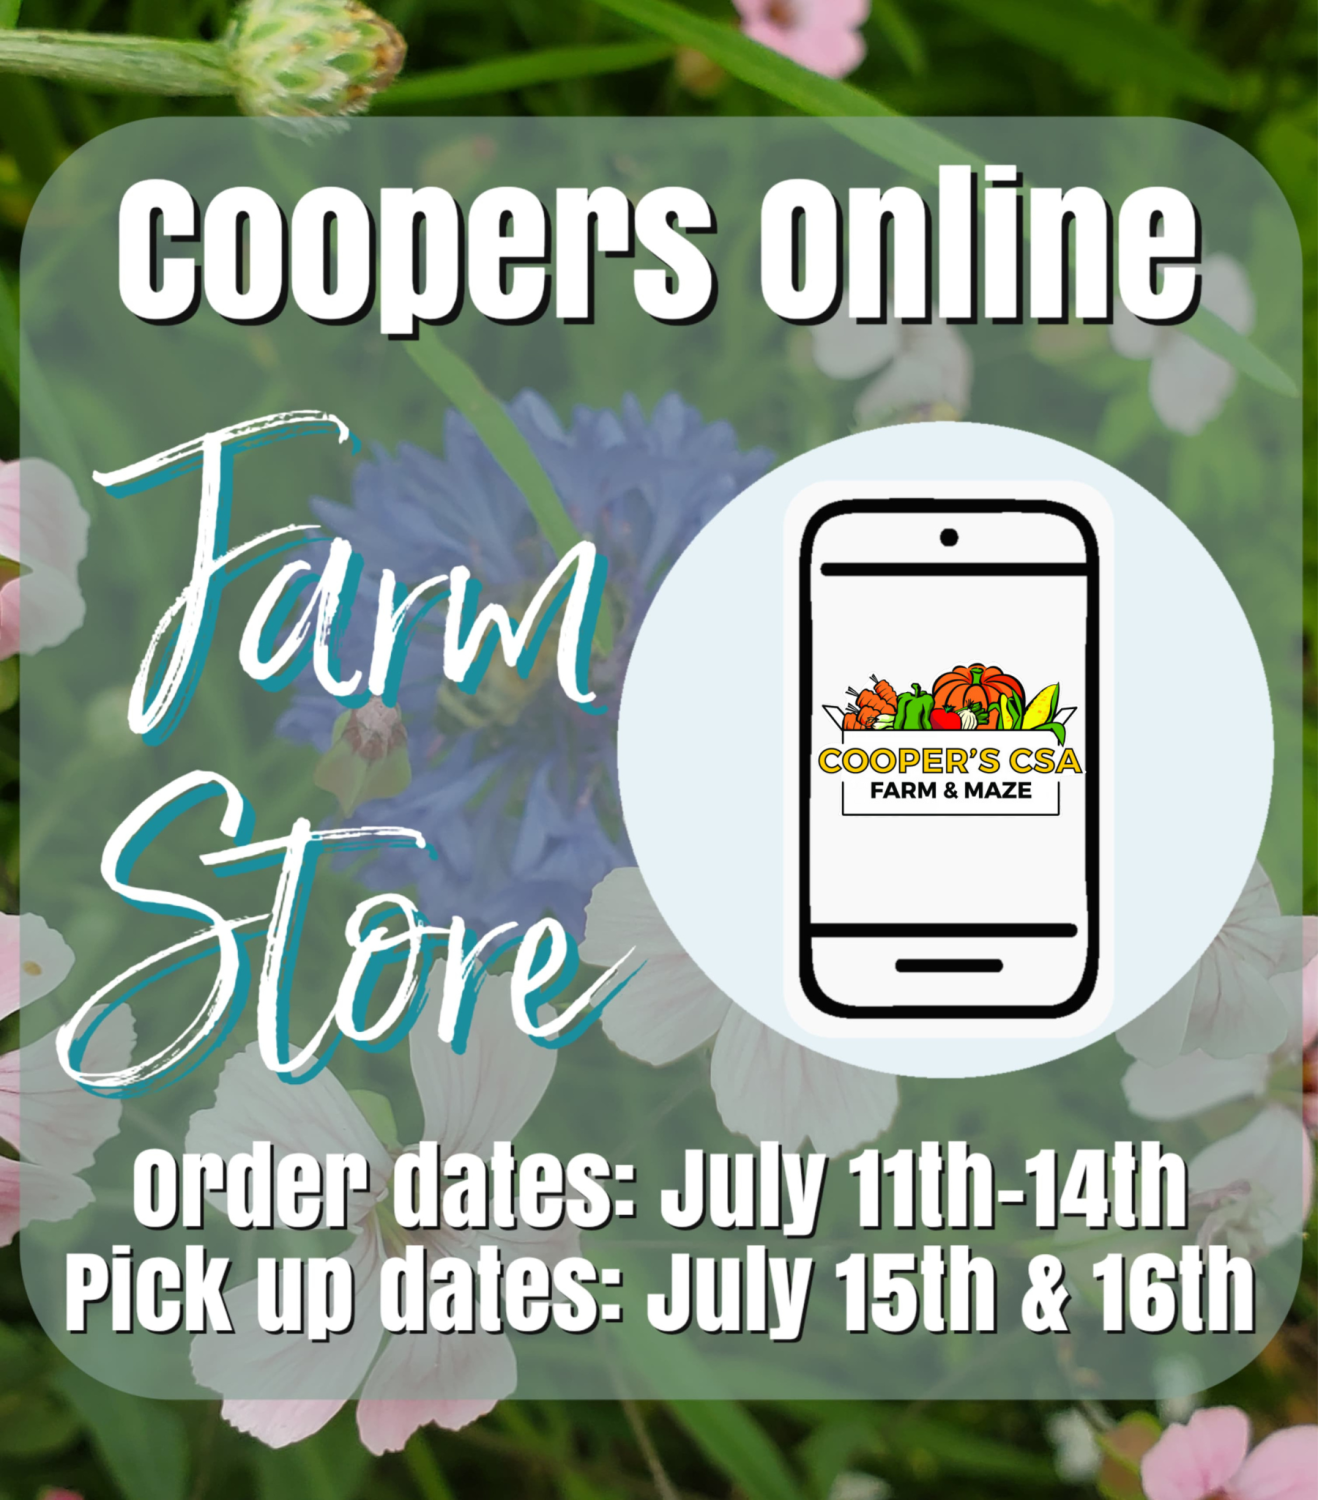 Previous Happening: Coopers Online Farm Stand- Order week July 11th-16th